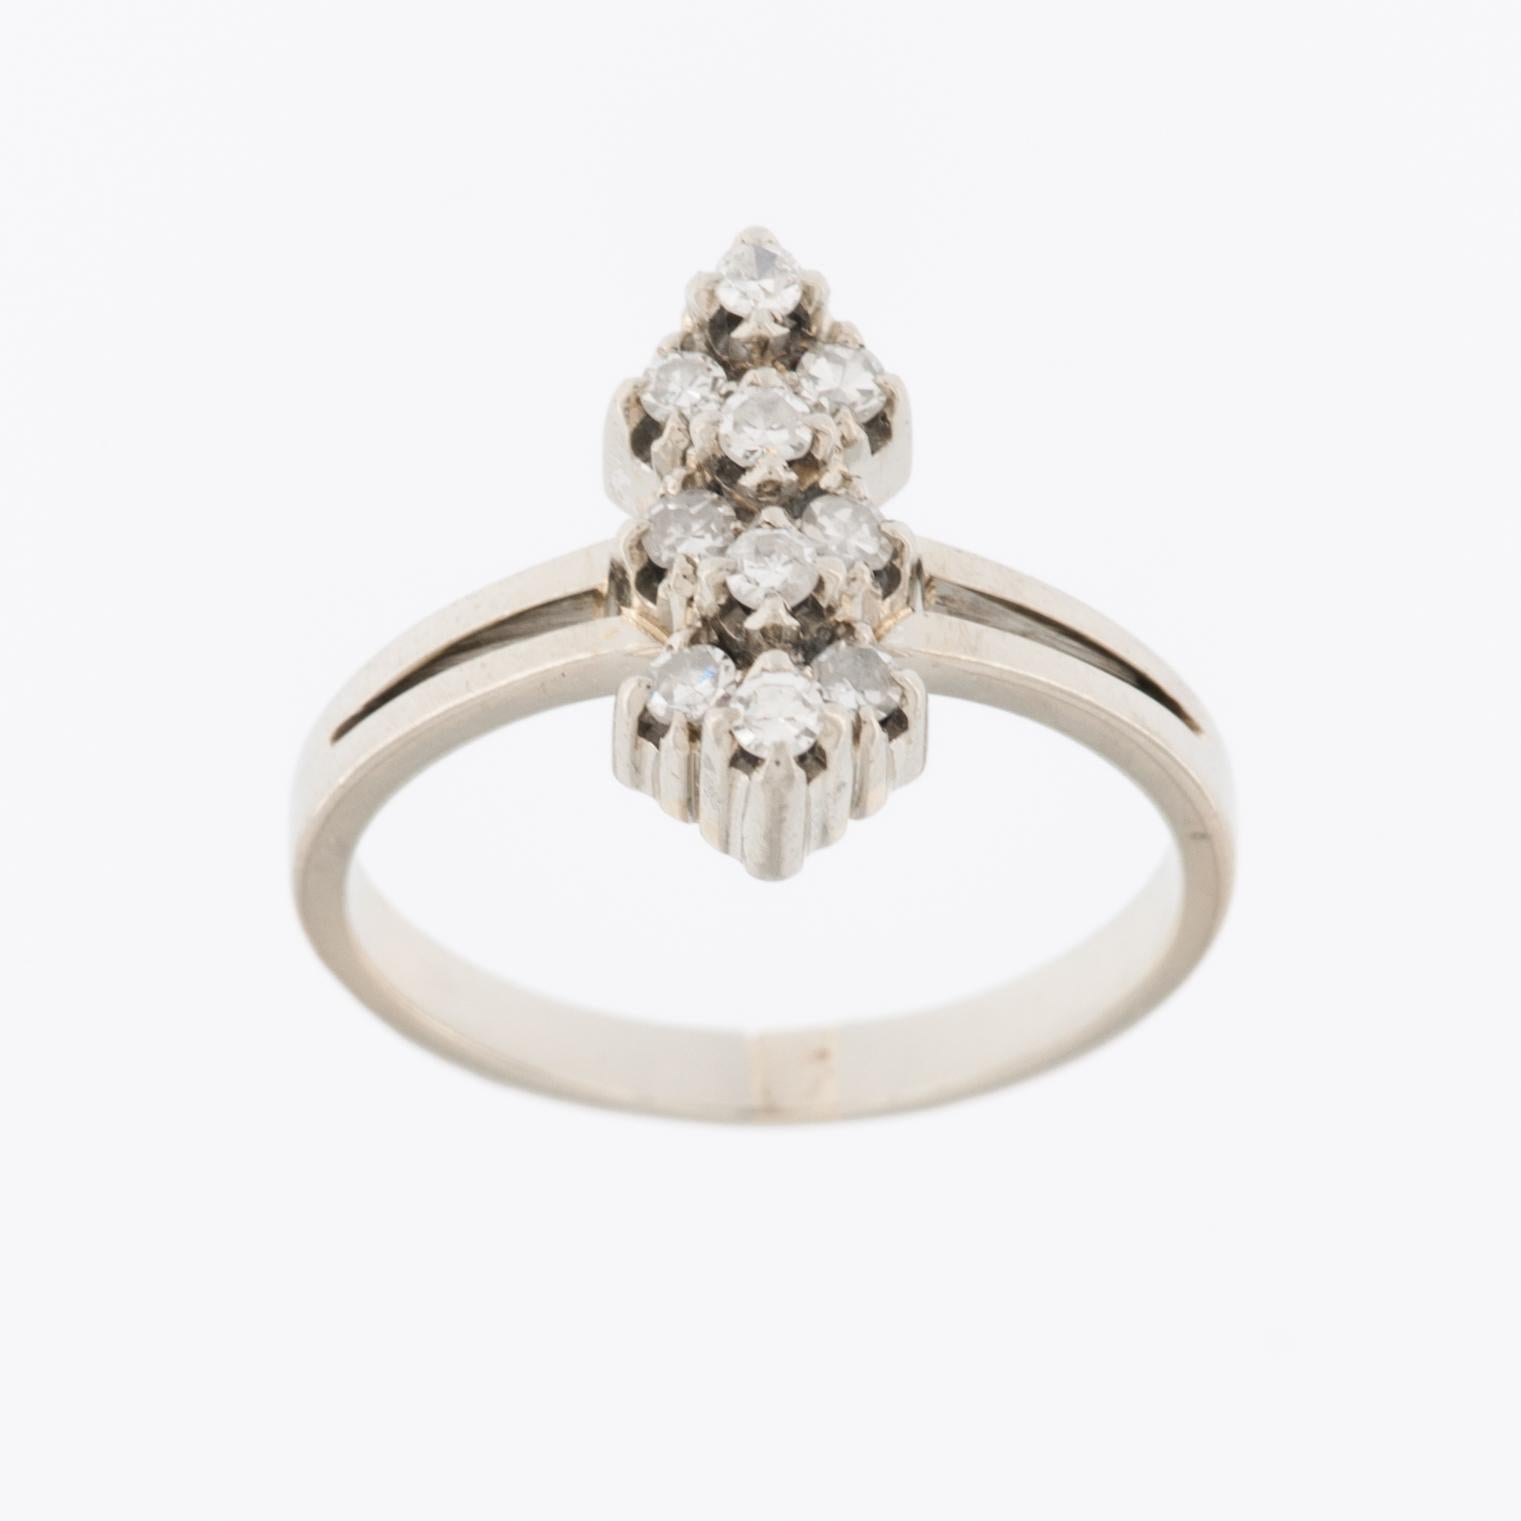 The Art Deco Platinum Diamond Ring is a stunning and timeless piece of jewelry that embodies the design aesthetic of the Art Deco era, which peaked in popularity during the 1920s and 1930s. 

The ring is made of platinum, a precious metal known for